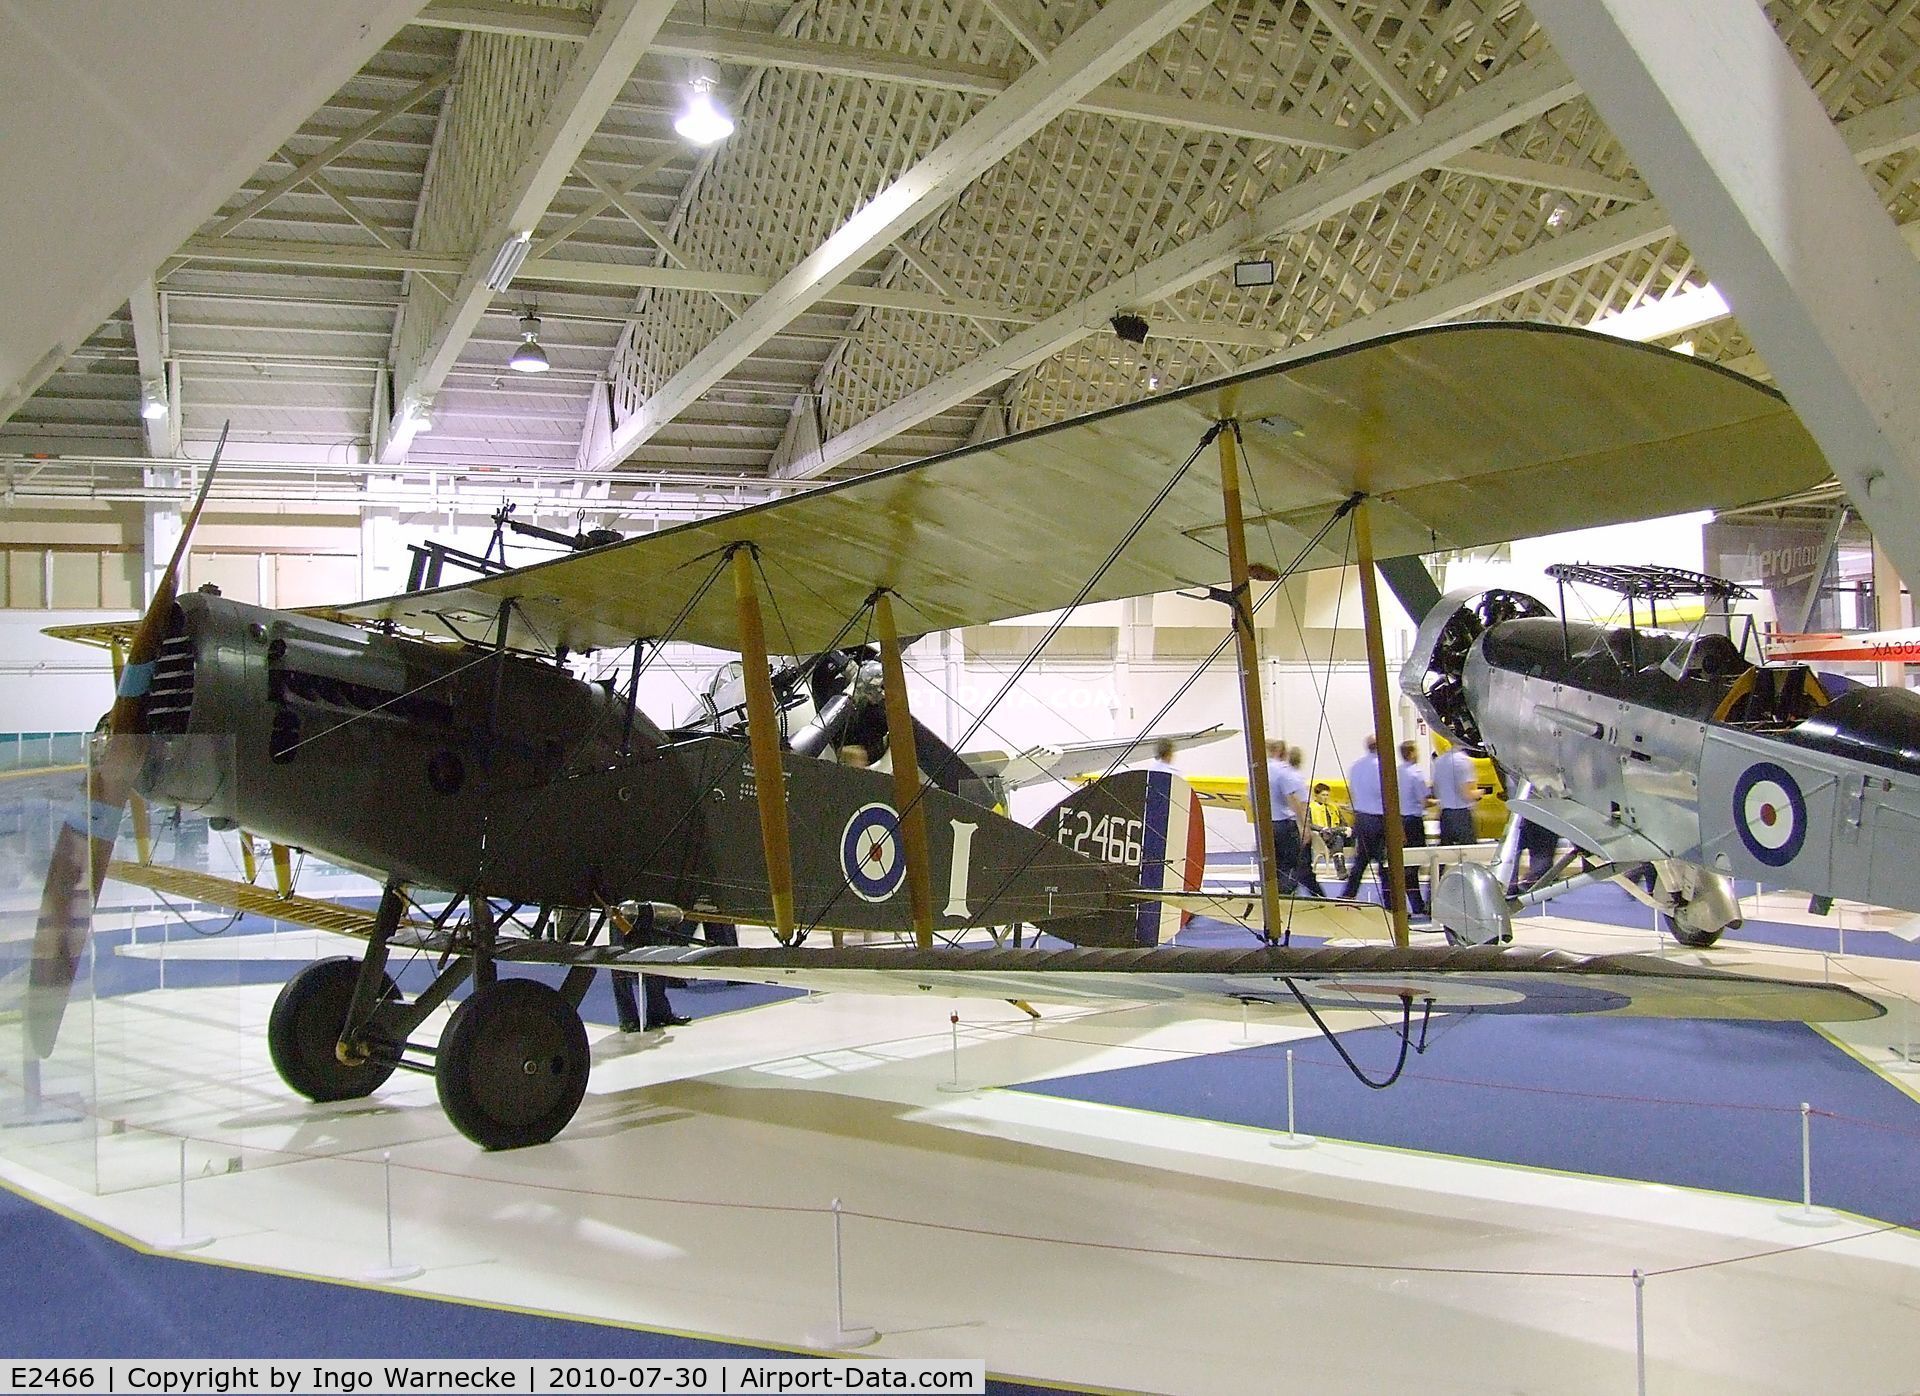 E2466, Bristol F.2B Fighter C/N Composite, Bristol F.2B Fighter (minus starboard outer skin) at the RAF Museum, Hendon